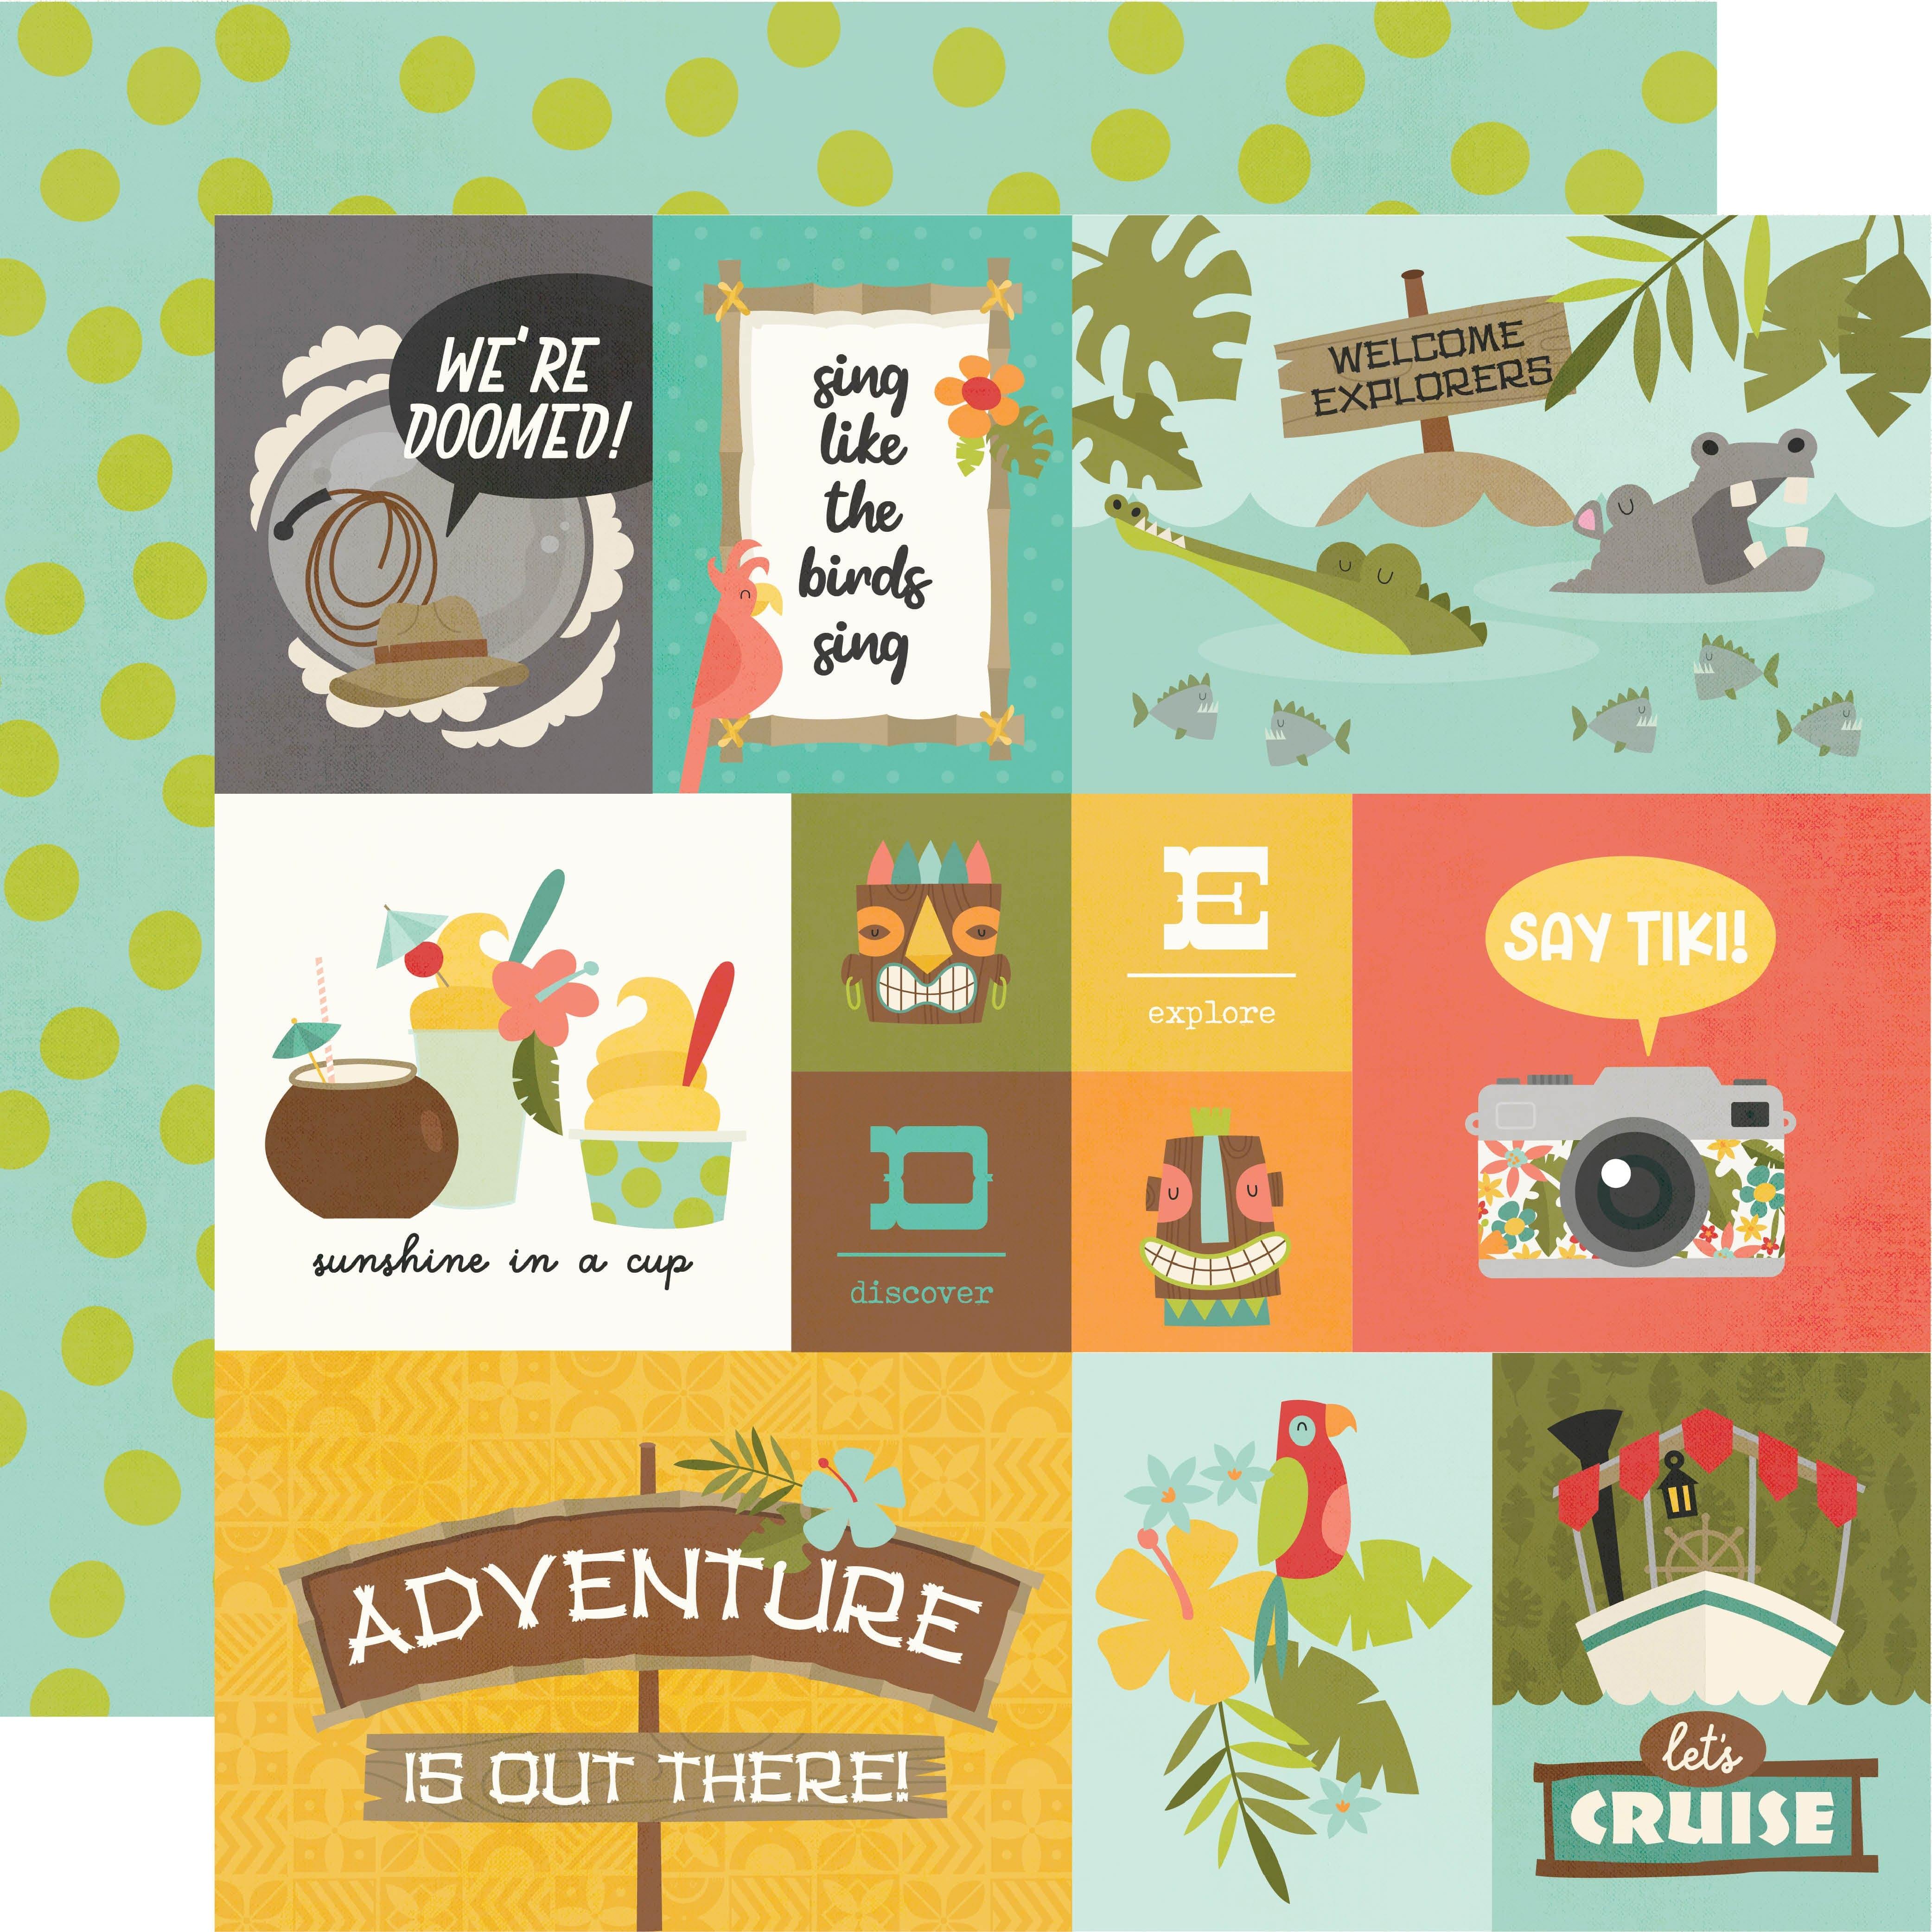 Say Cheese Adventure At The Park Collection Elements 2 12 x 12 Double-Sided Scrapbook Paper by Simple Stories - Scrapbook Supply Companies